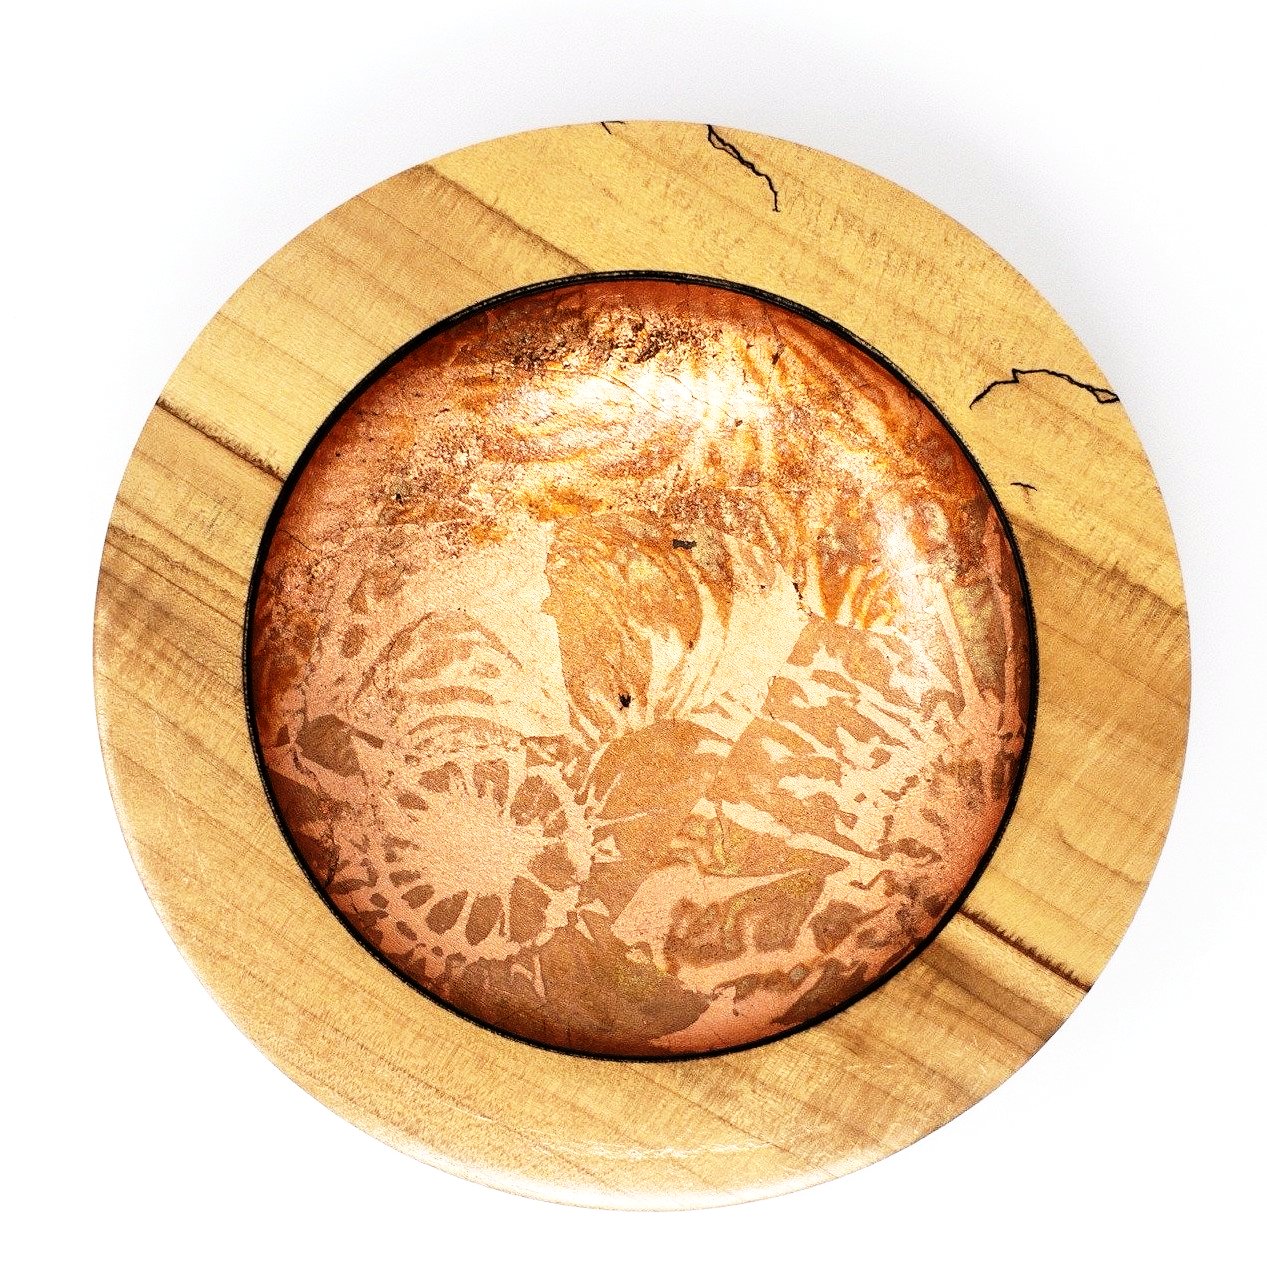 Stunning spalted Maple Art bowl with copper foil.